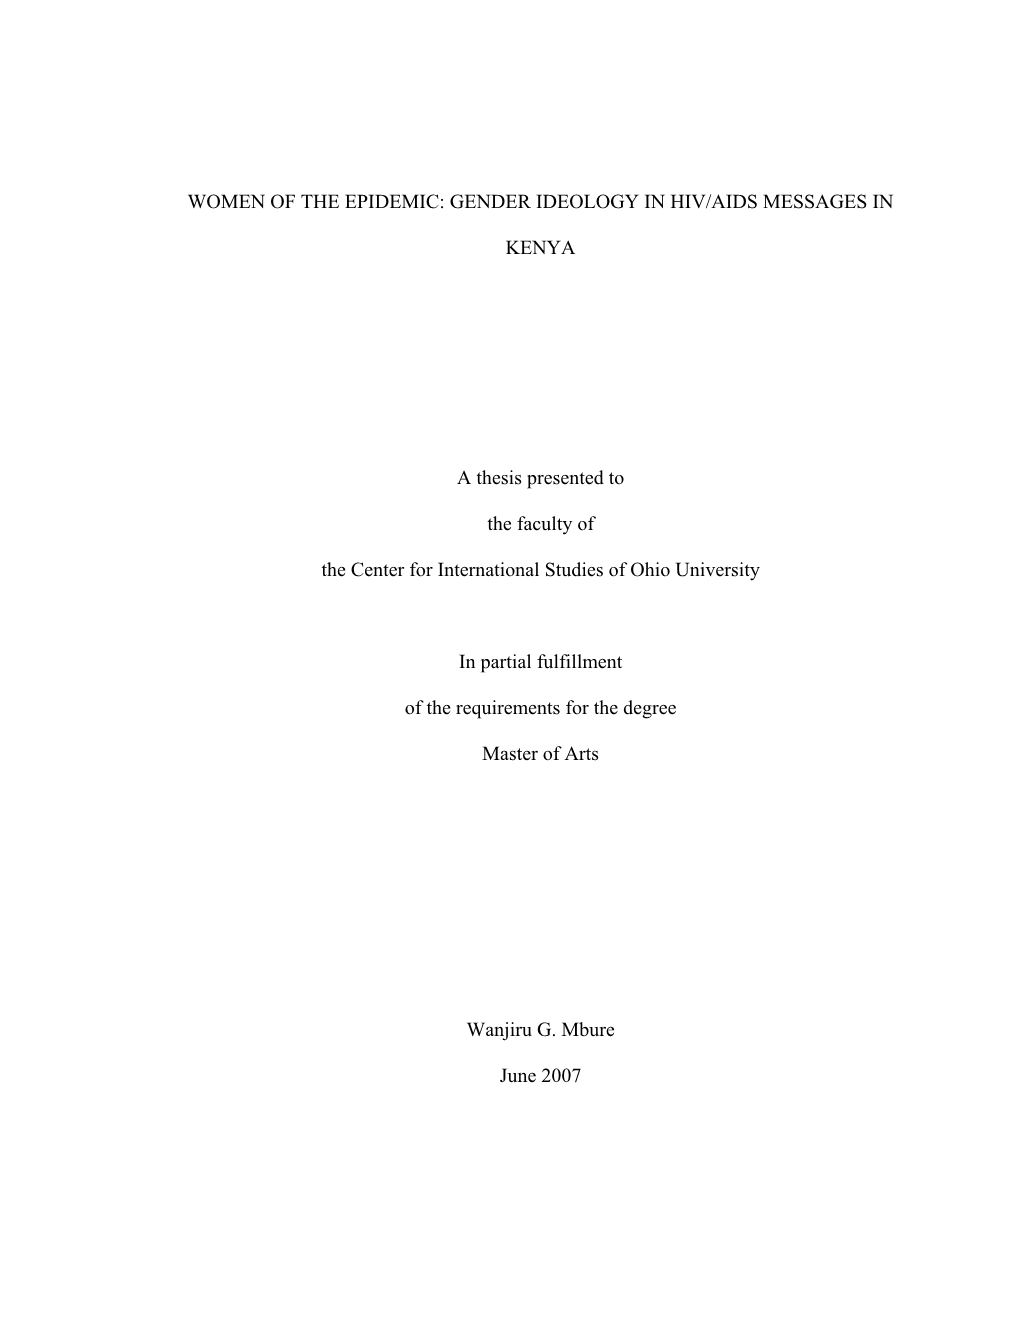 Women of the Epidemic: Gender Ideology in Hiv/Aids Messages In